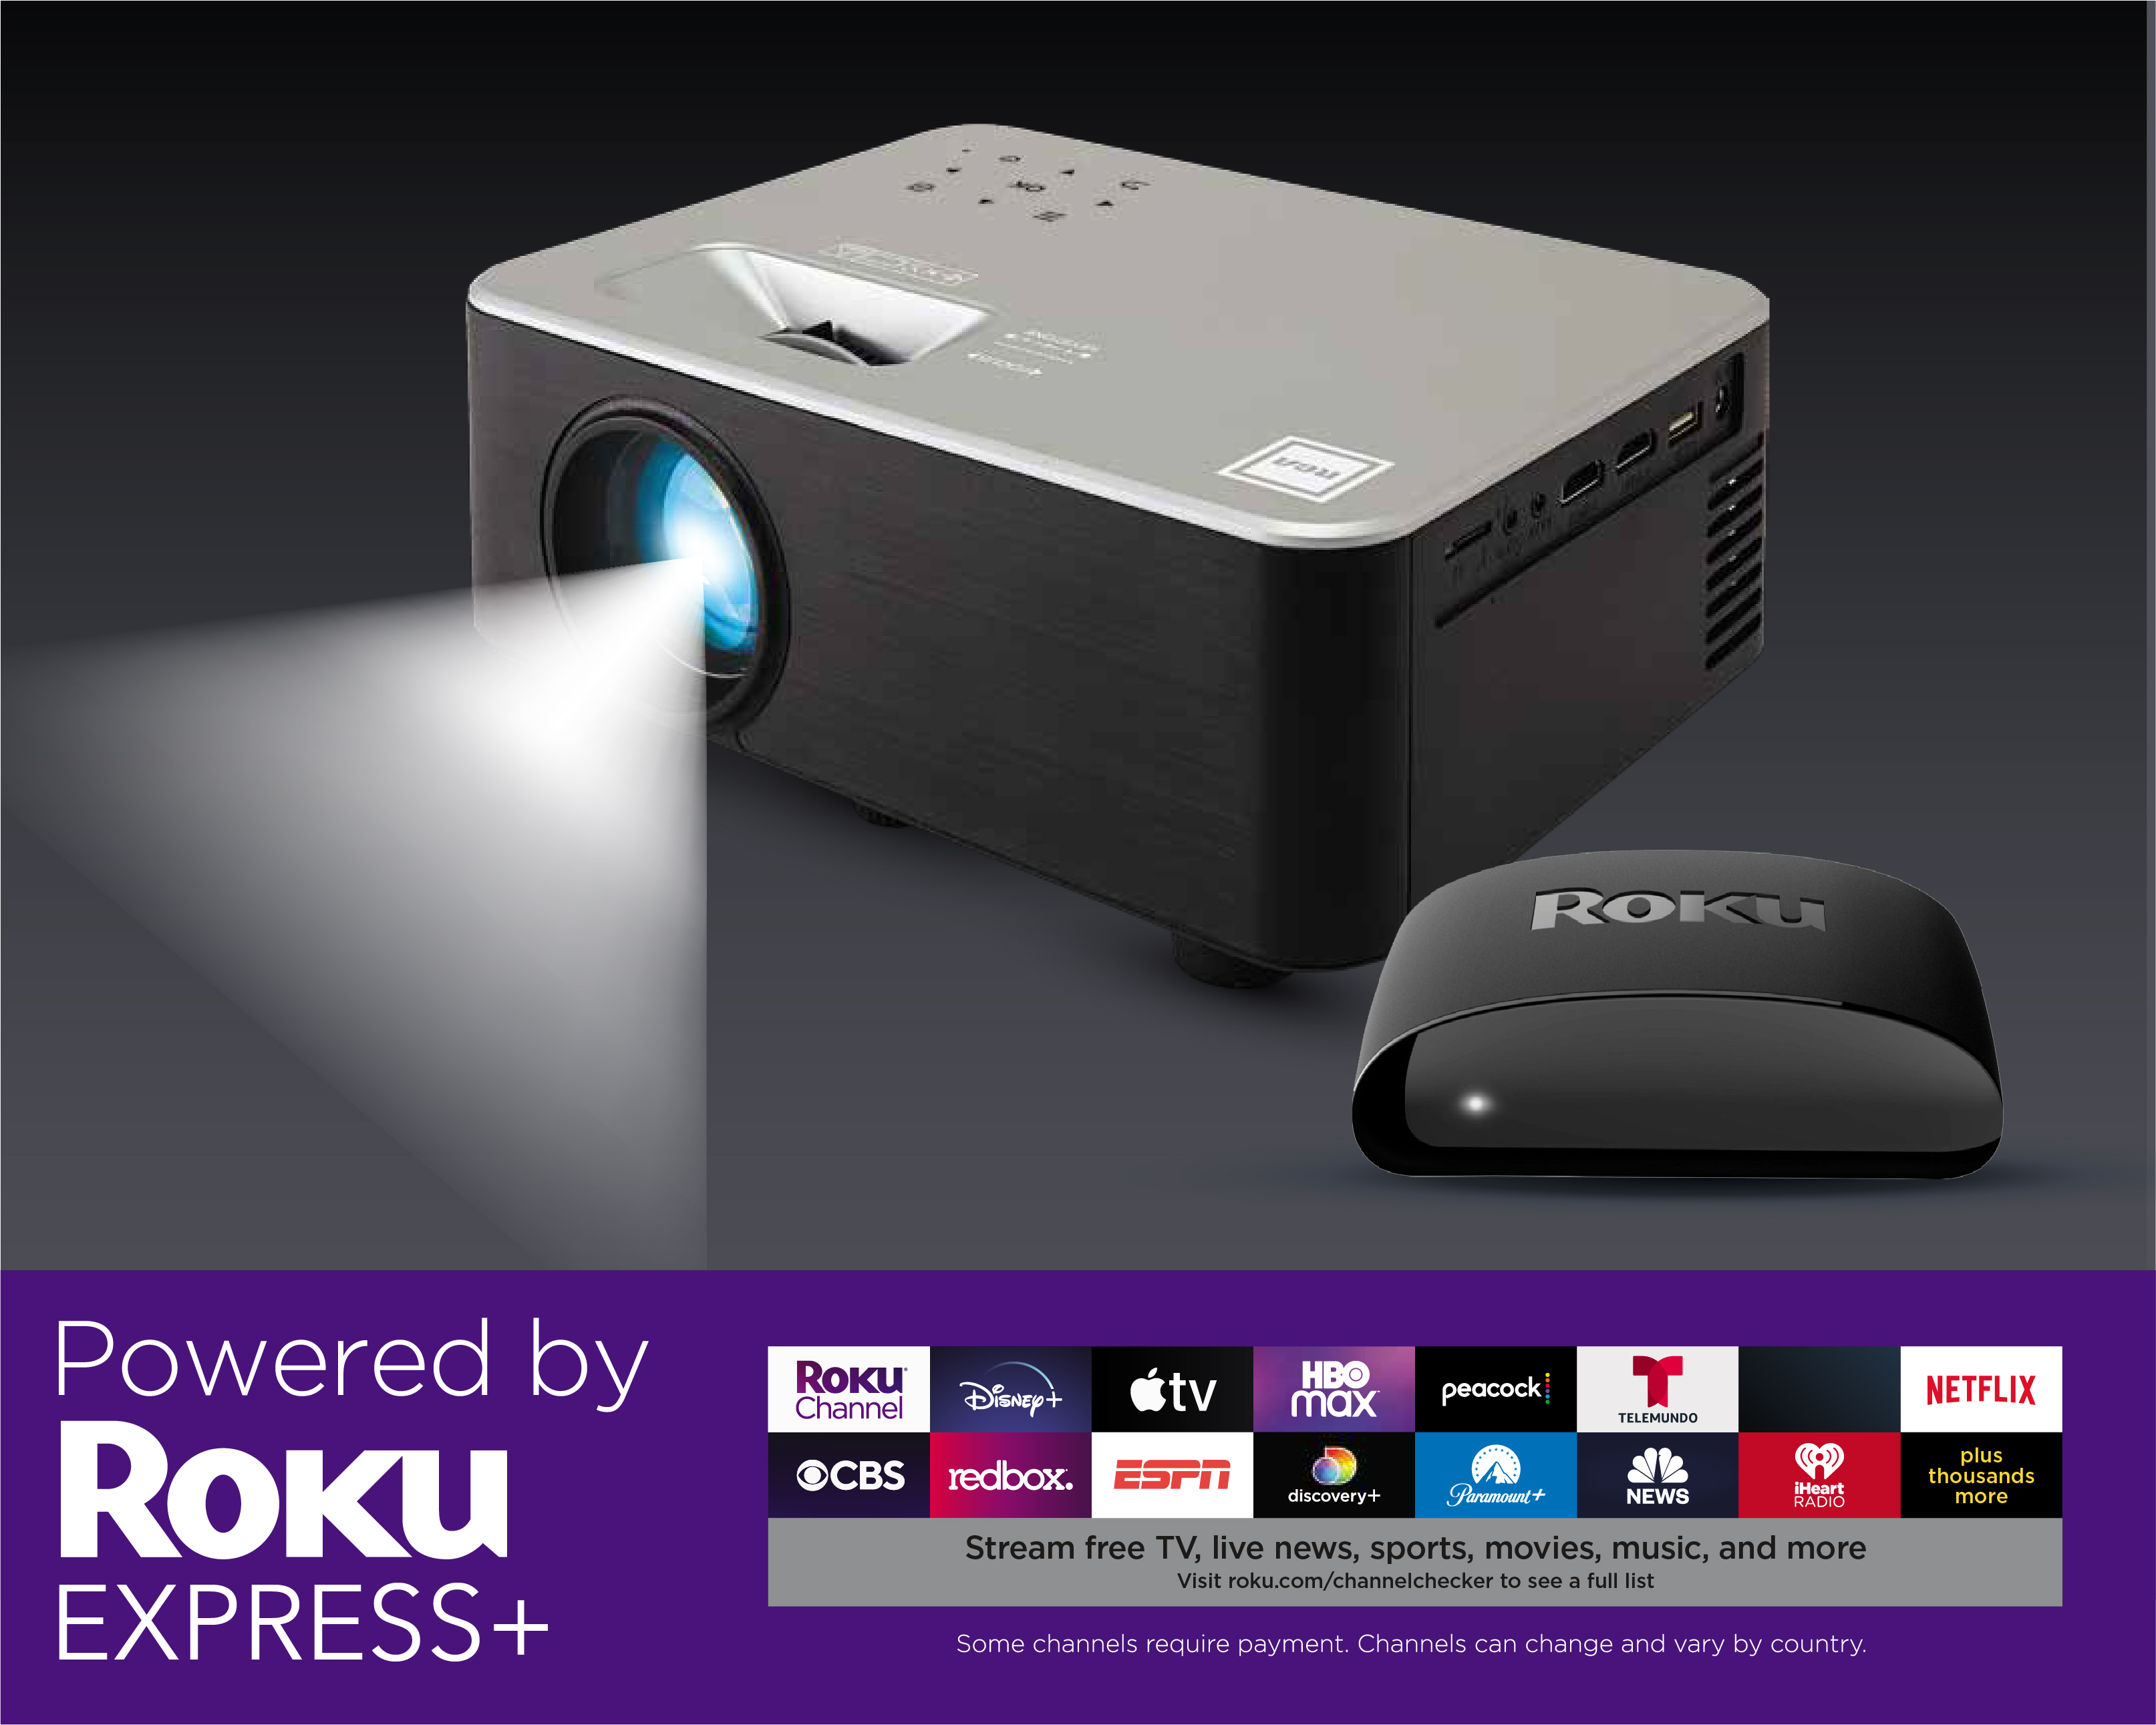 RCA 720p Smart Wi-Fi Home Theater Projector w/ Roku Stick - image 3 of 10